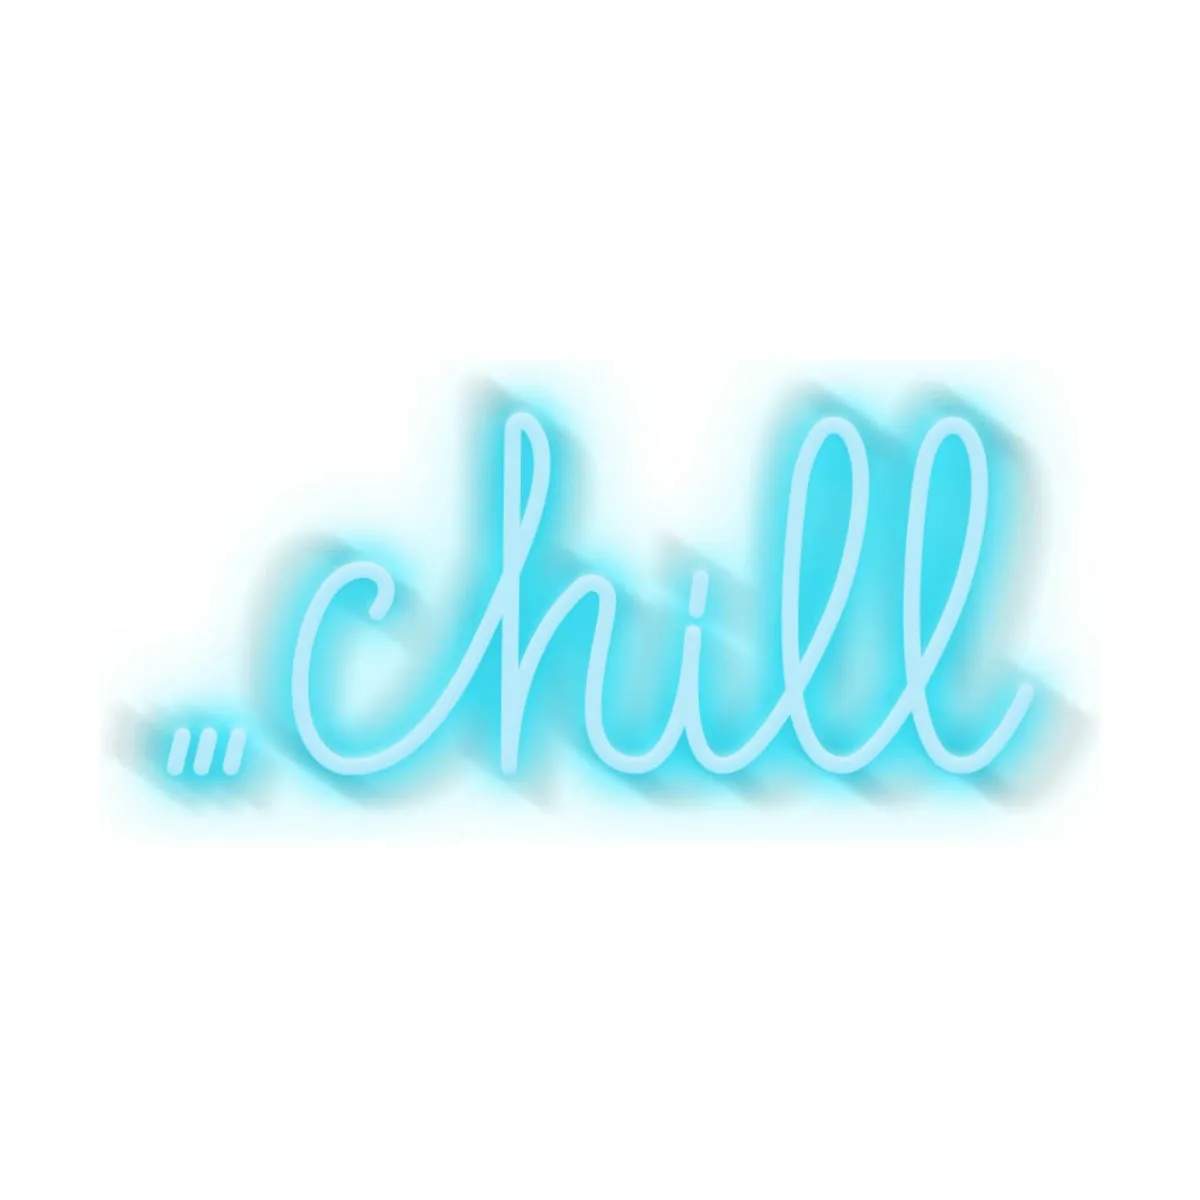 Neon LED Lampe - Chill, chill, large